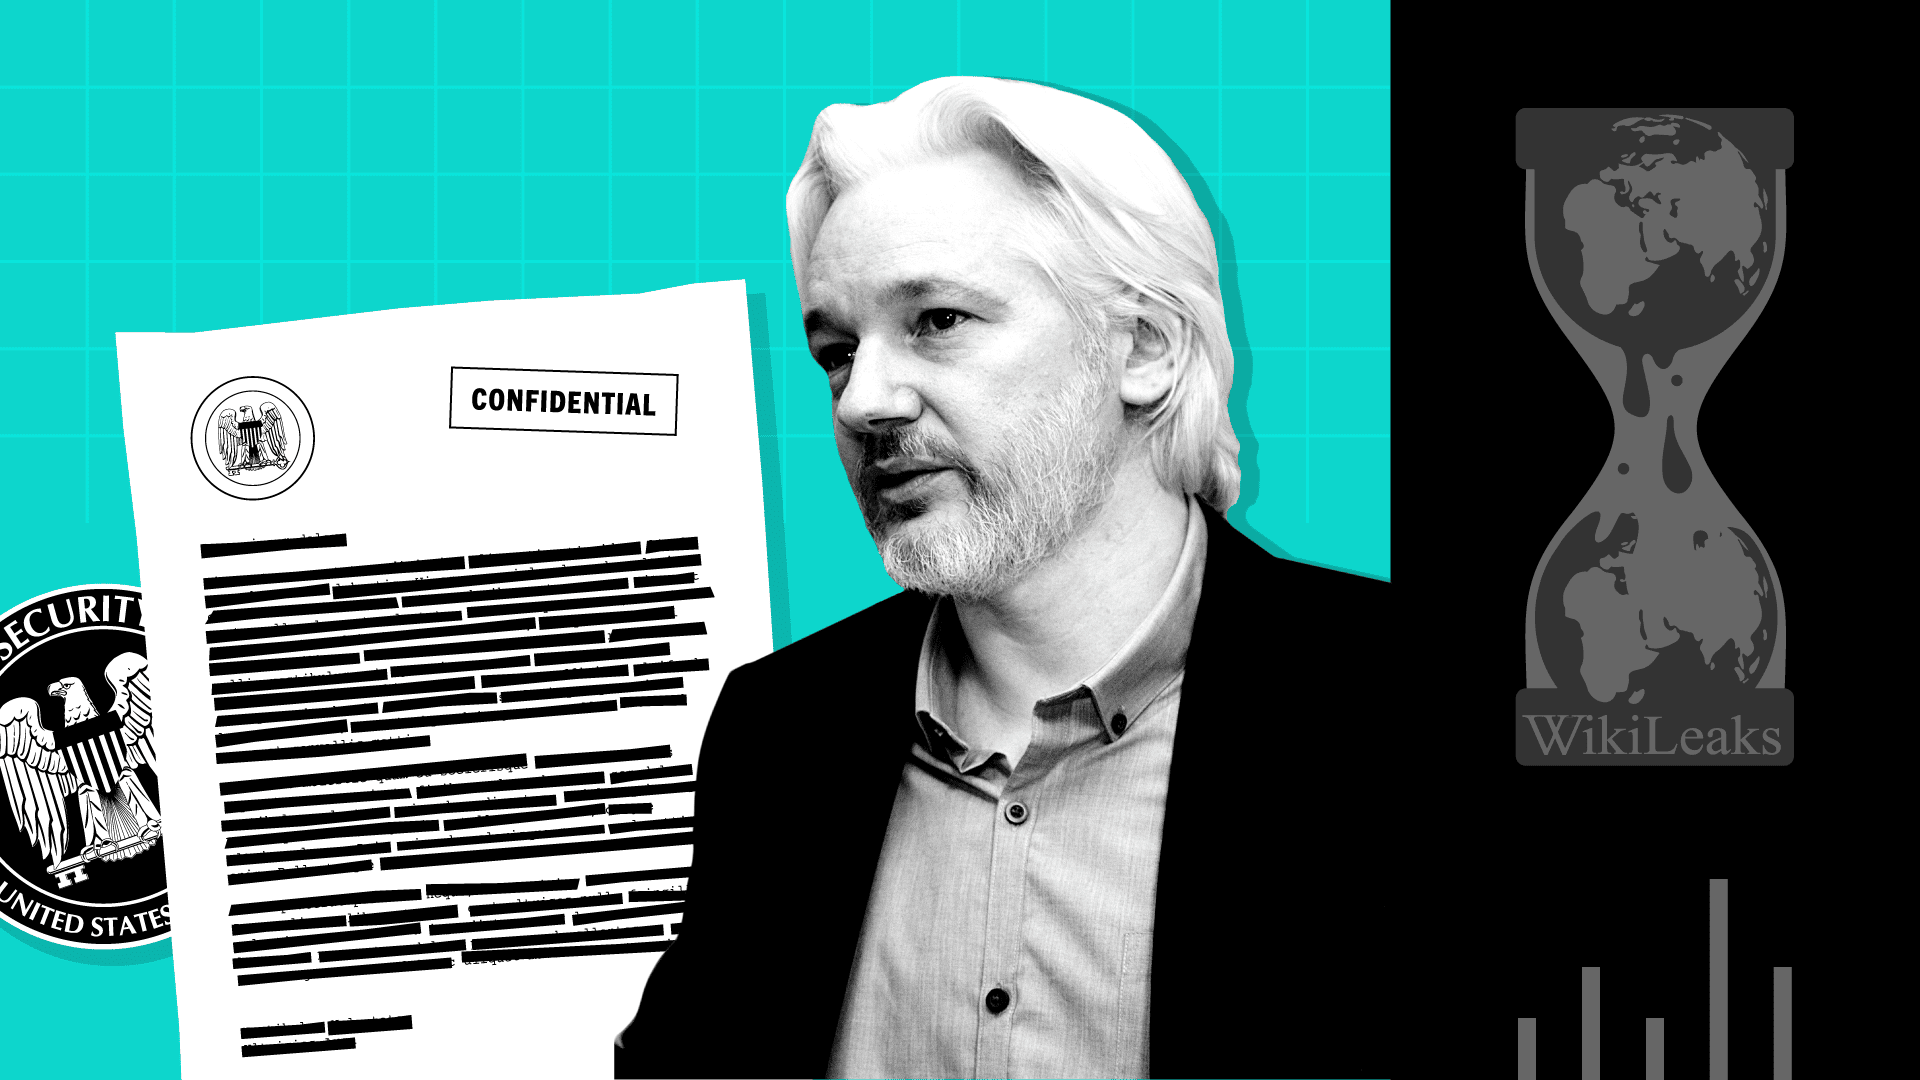 Graphic conveying Julian Assange and Wikileaks